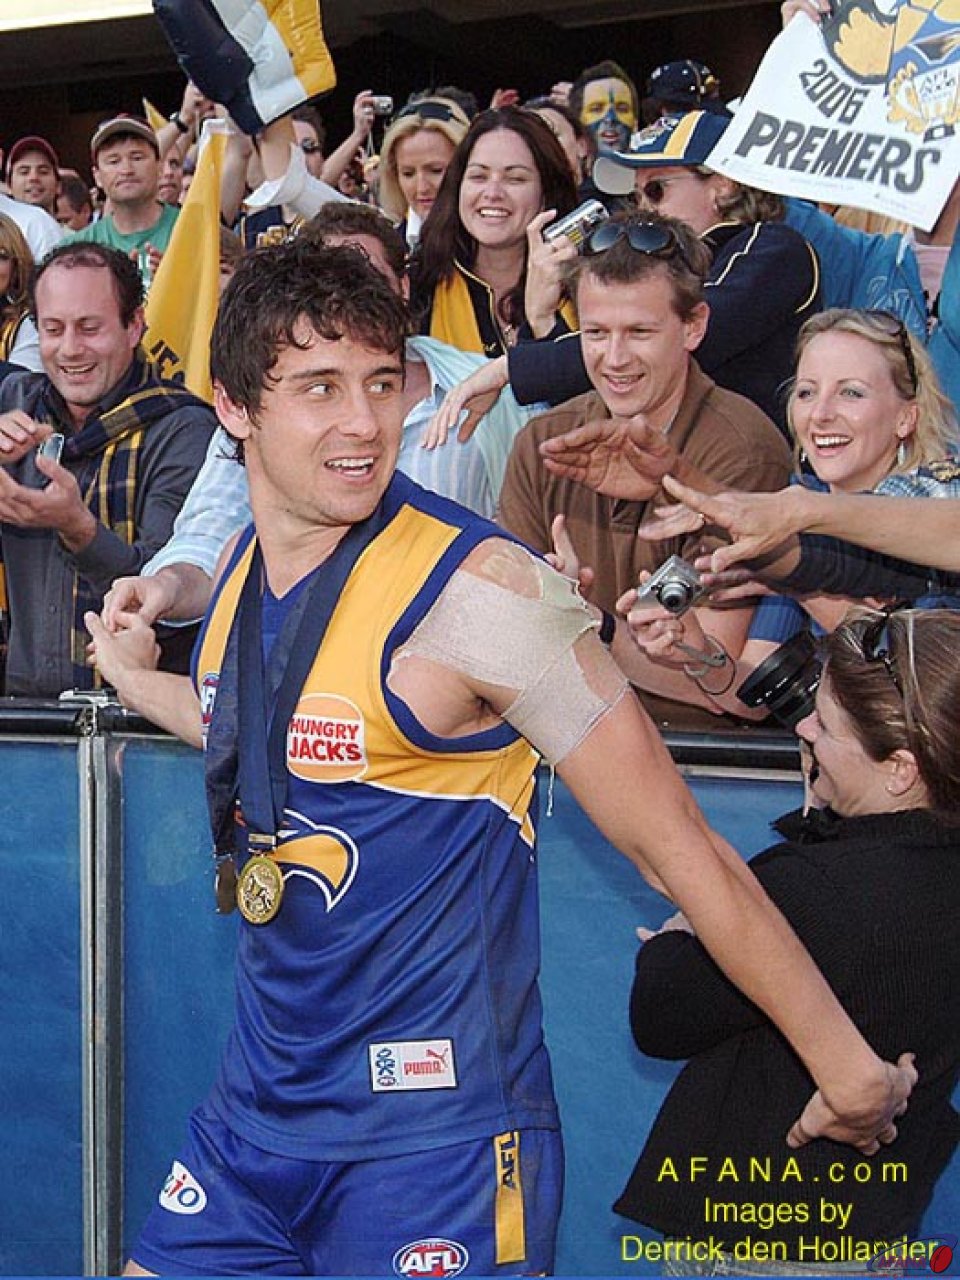 [b]Norm Smith Medallist Andrew Embly continues his team's lap of honour[/b]